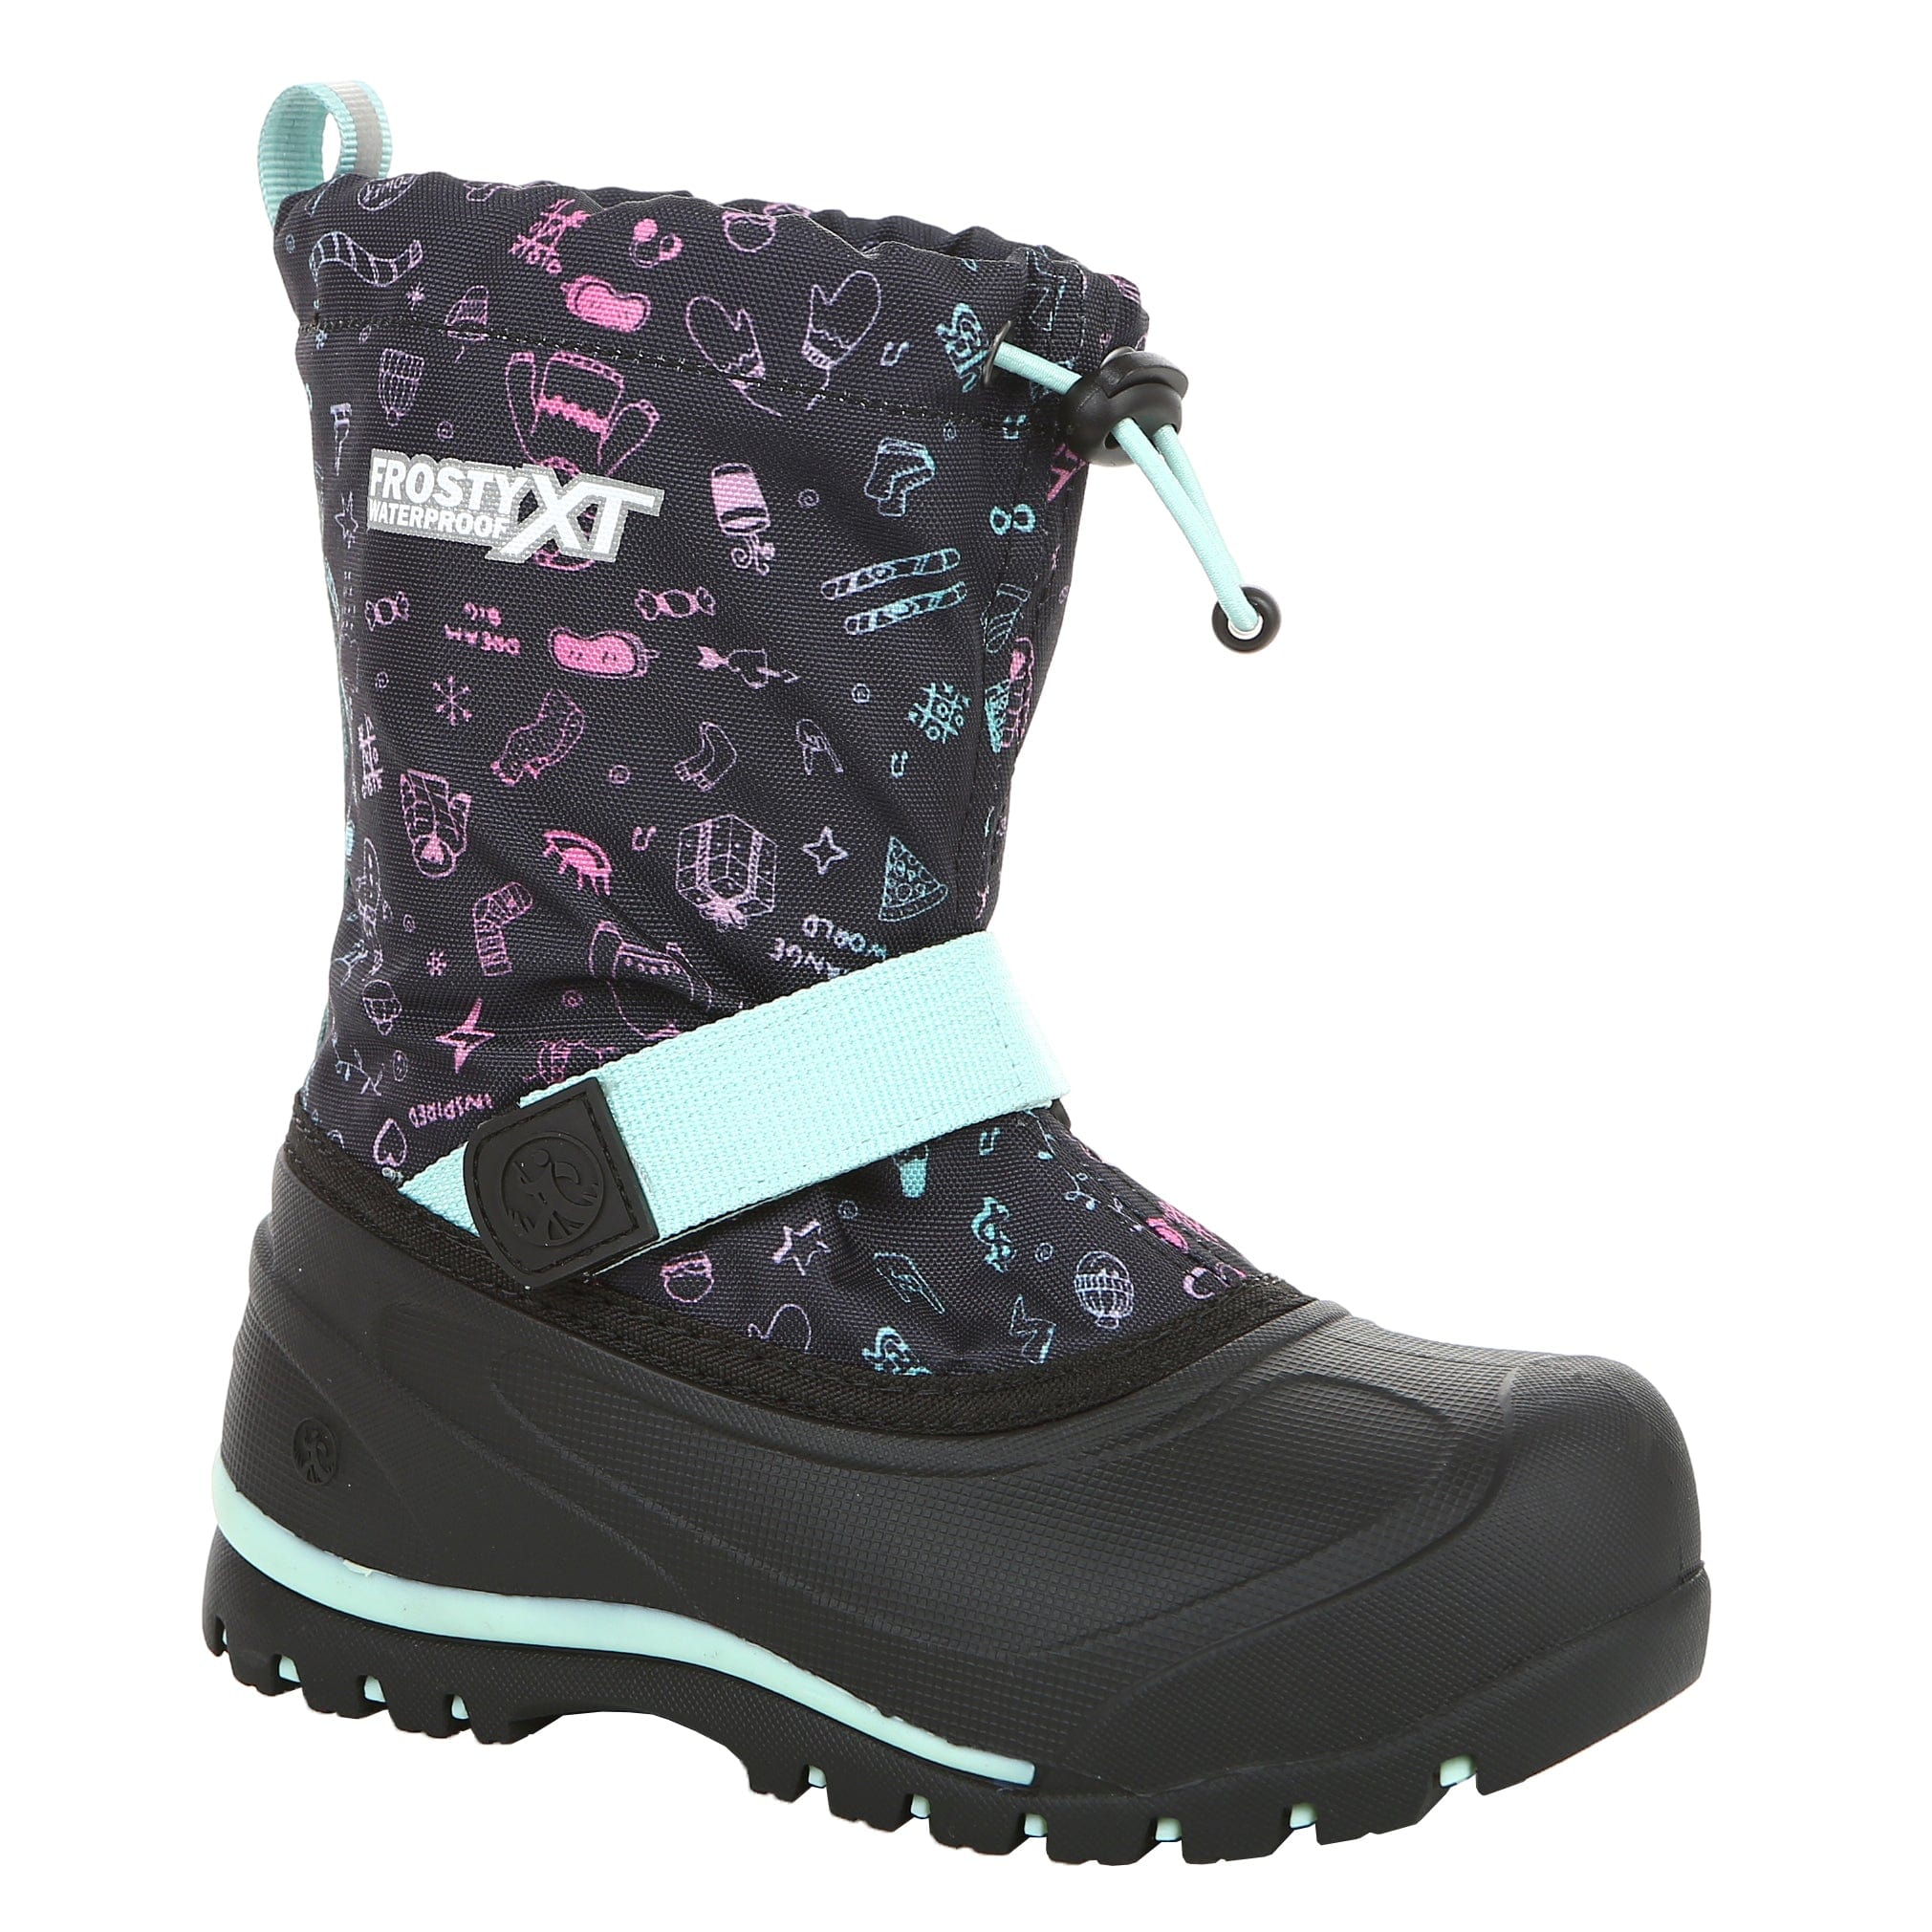 Kid's Frosty XT Waterproof Insulated Winter Snow Boot - Northside USA